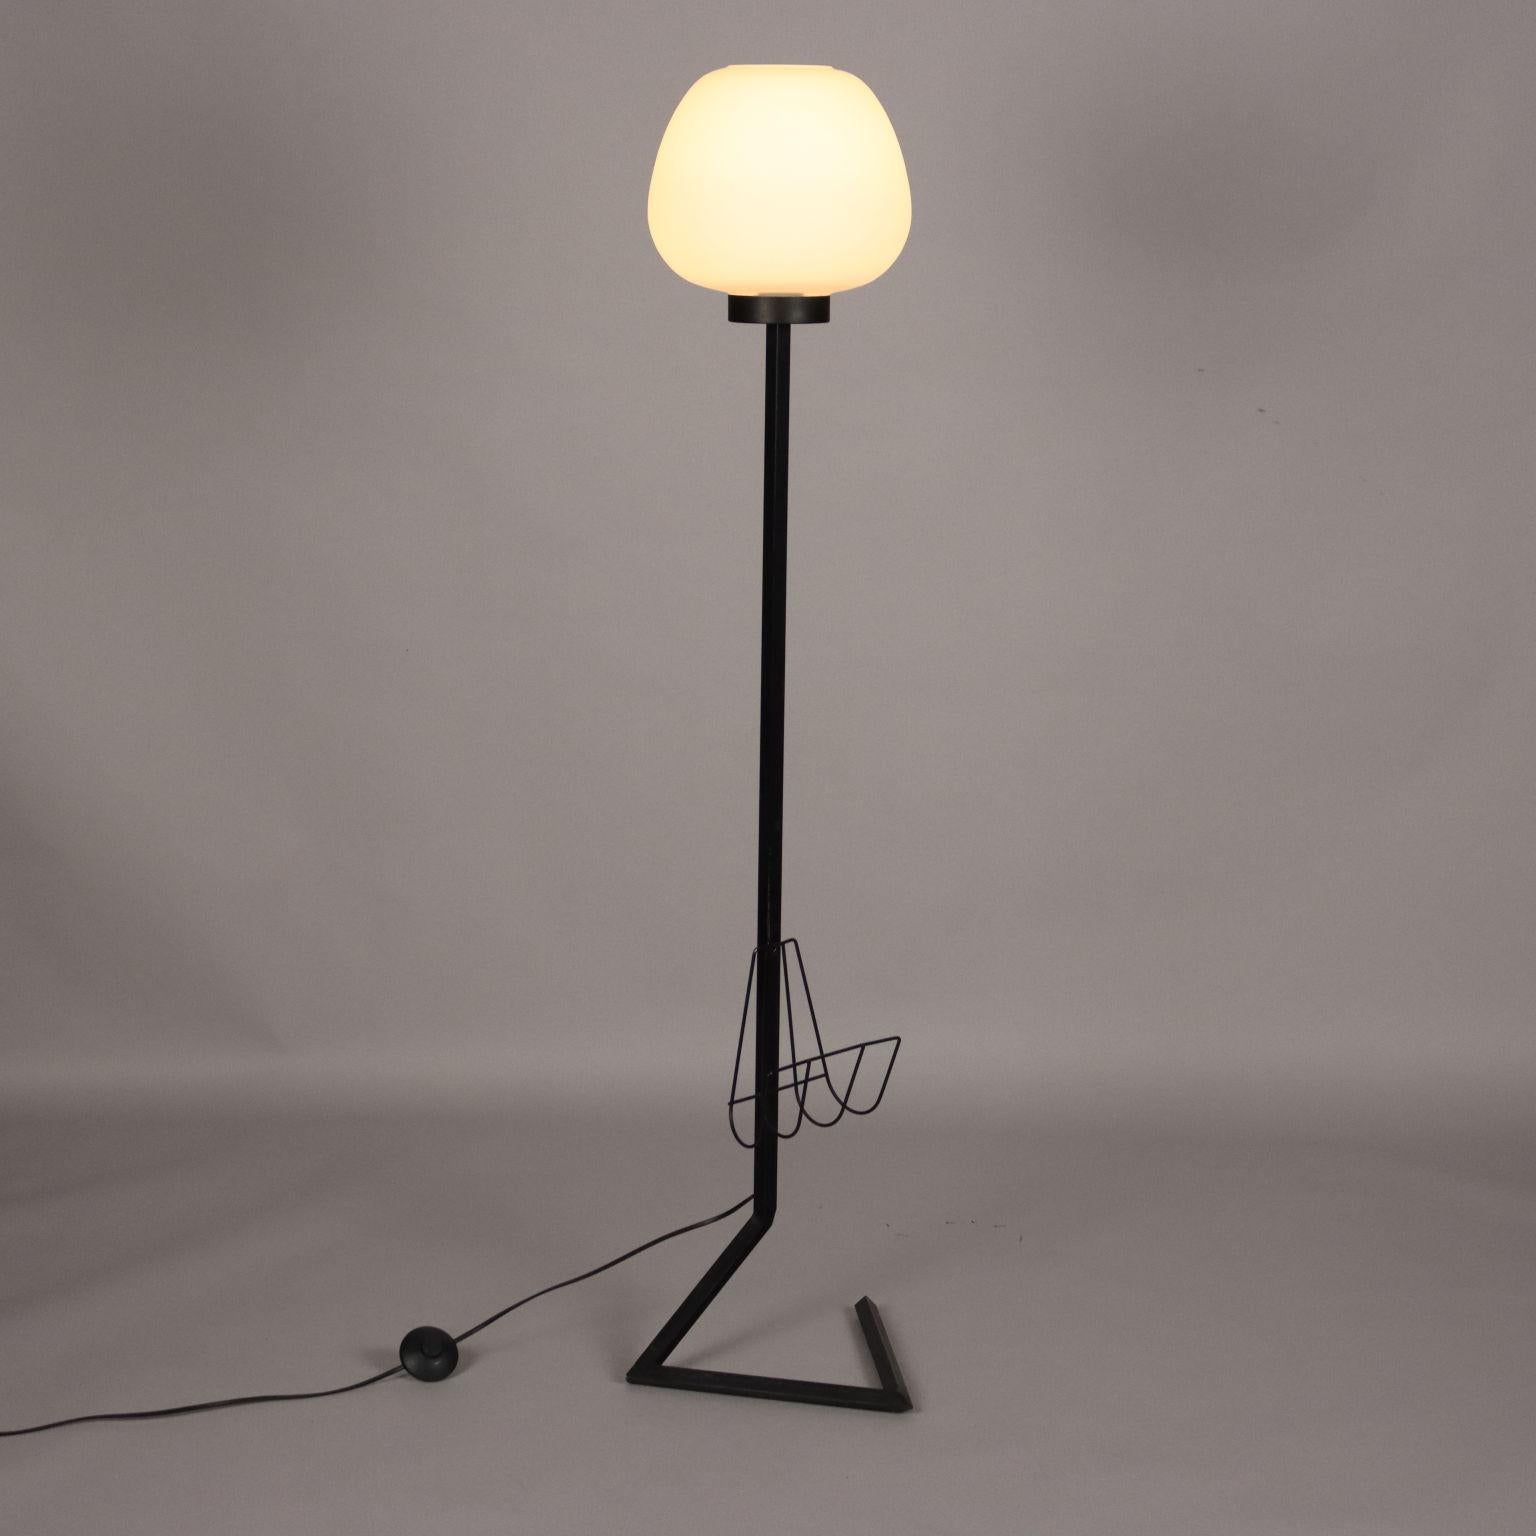 Floor lamp with magazine holder, made of enameled metal and the diffuser of opal glass. 